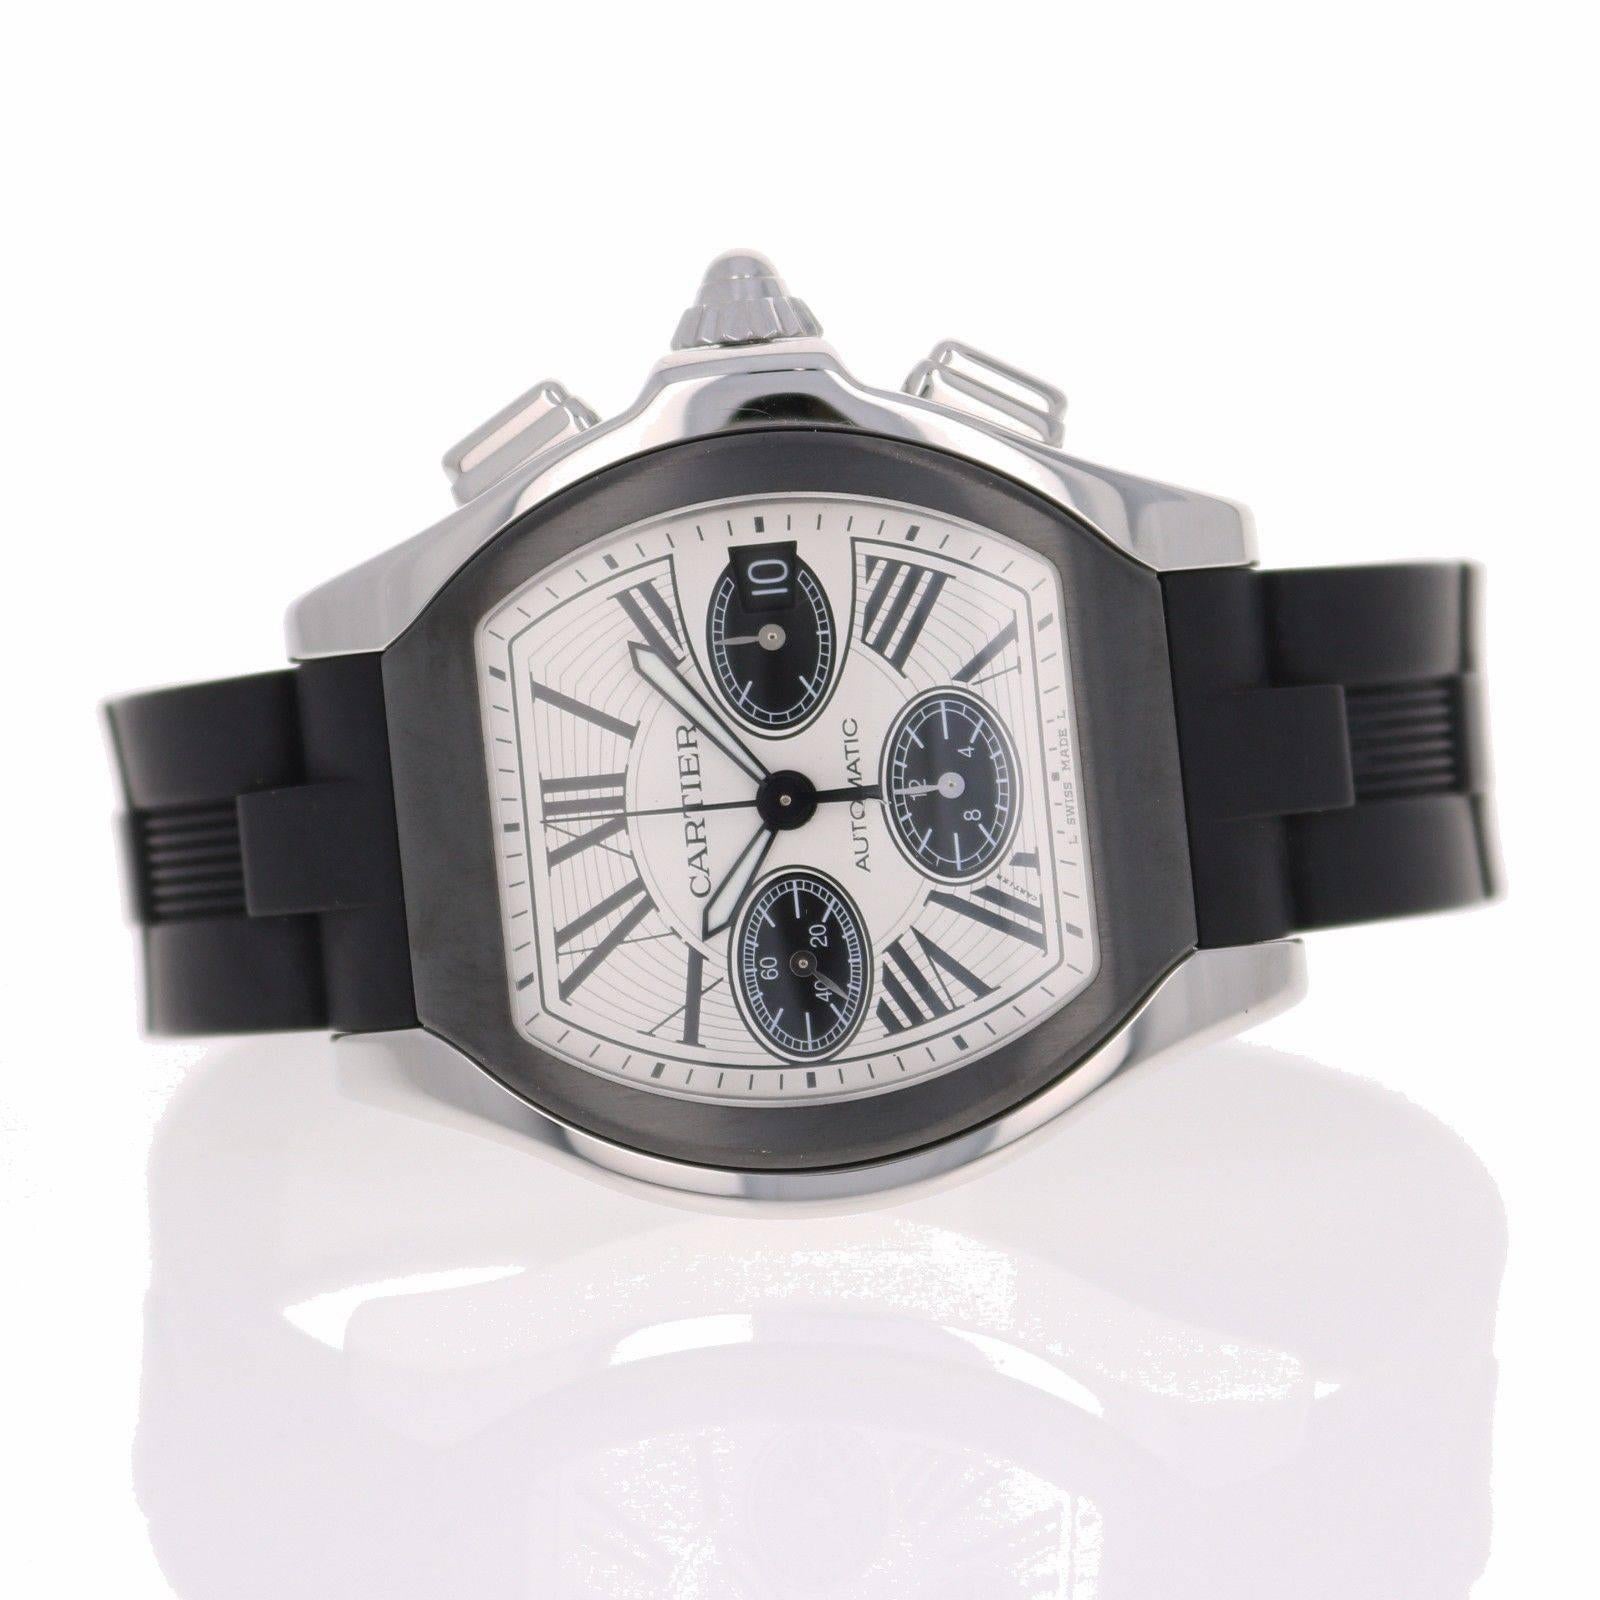 Cartier Roadster S Chronograph Stainless Steel Wristwatch 1